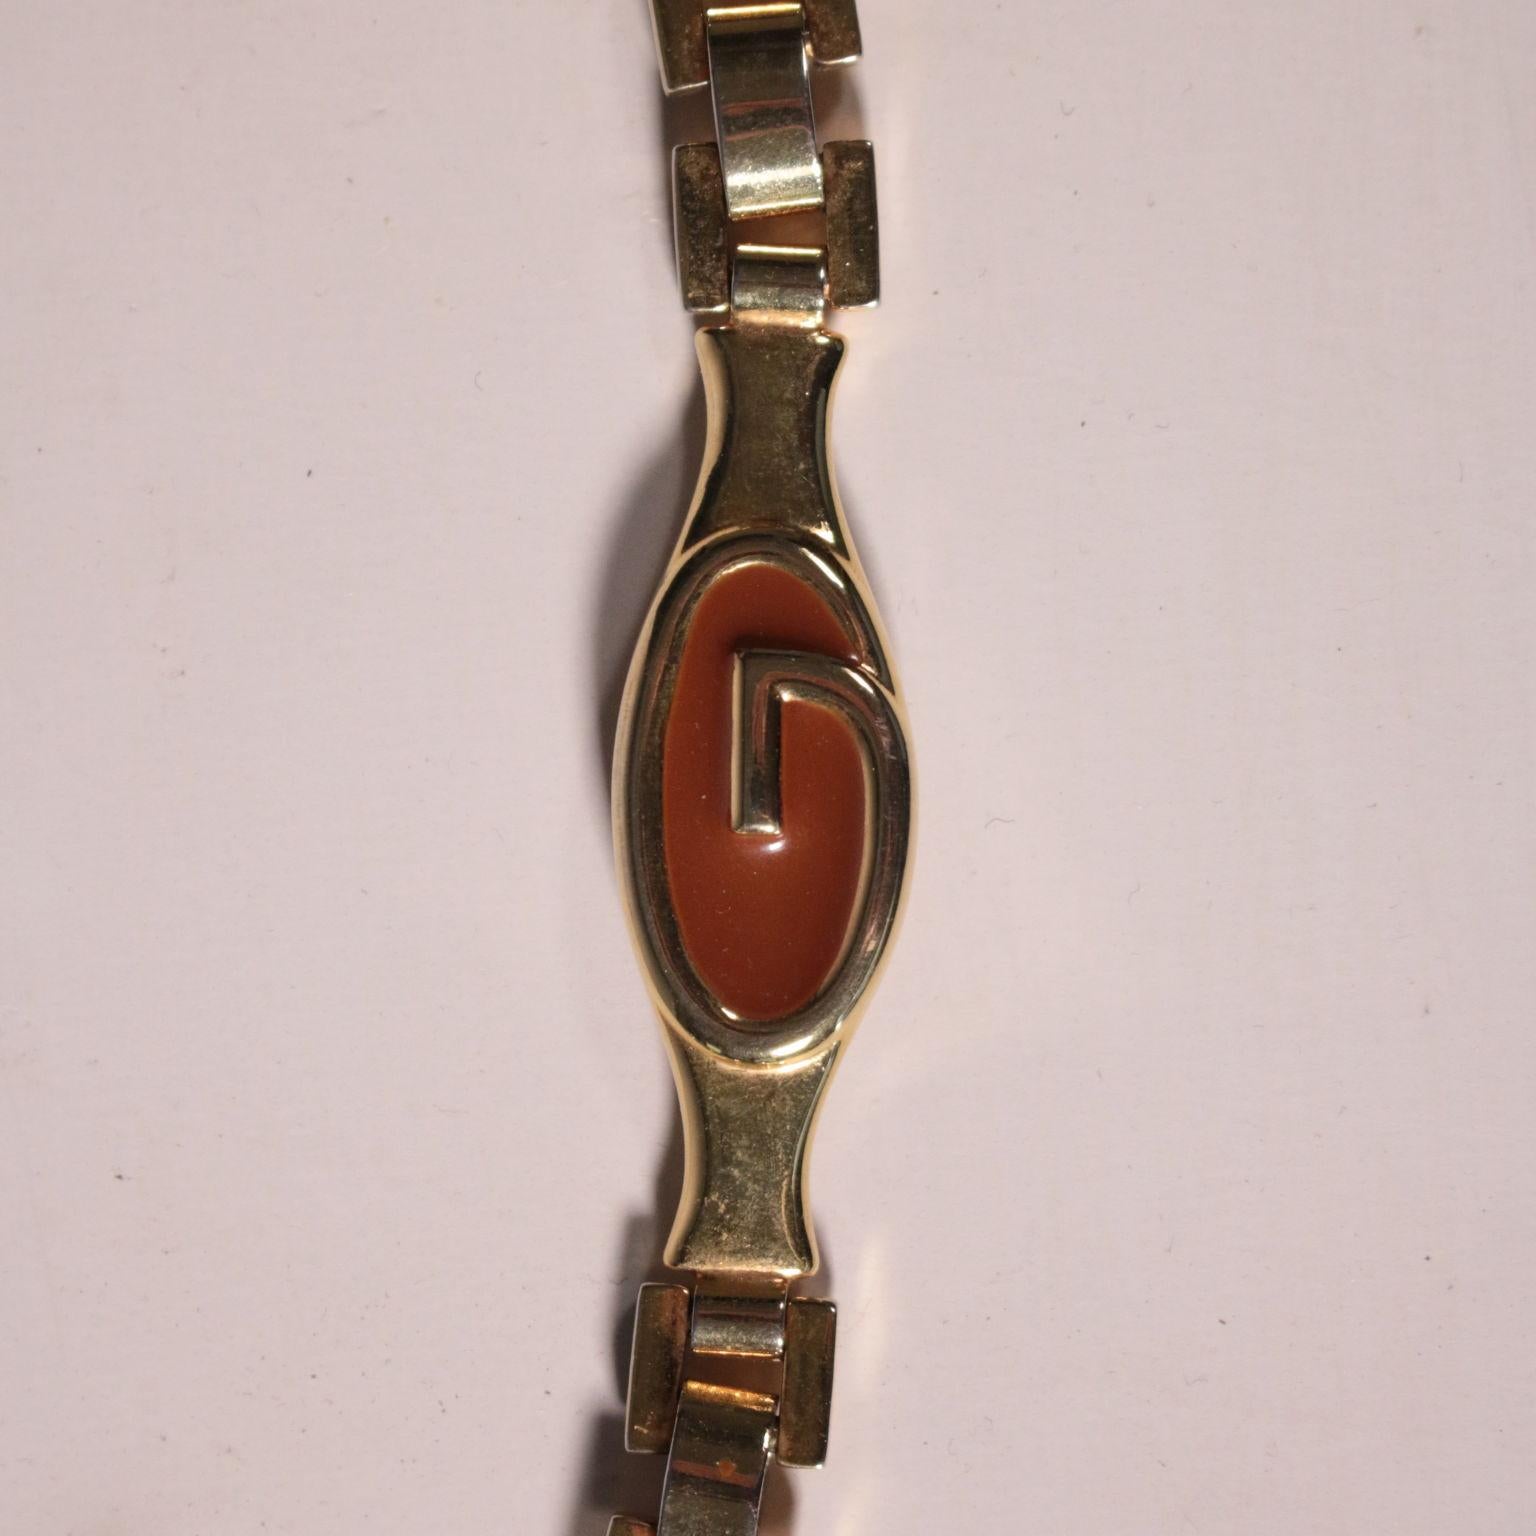 Gucci belt, chain worked, gilt metal, with brand, 1970s.